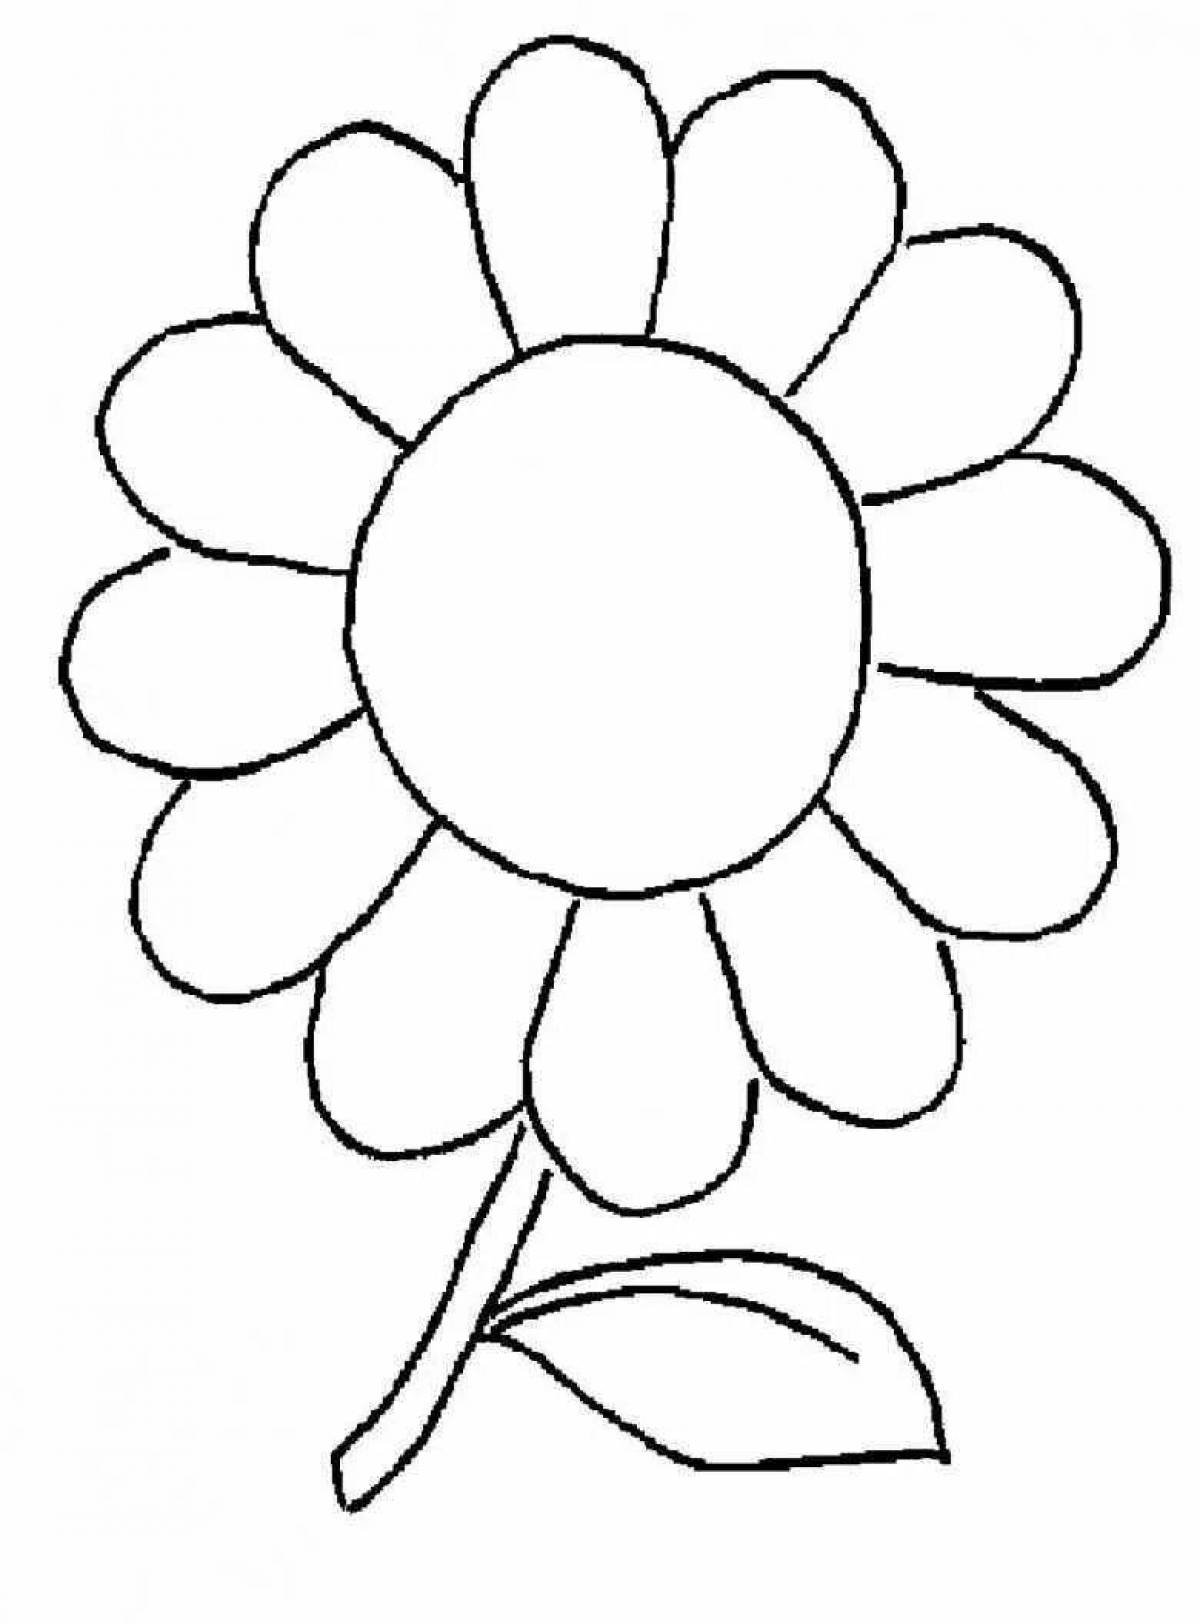 Coloring book cheerful chamomile pattern